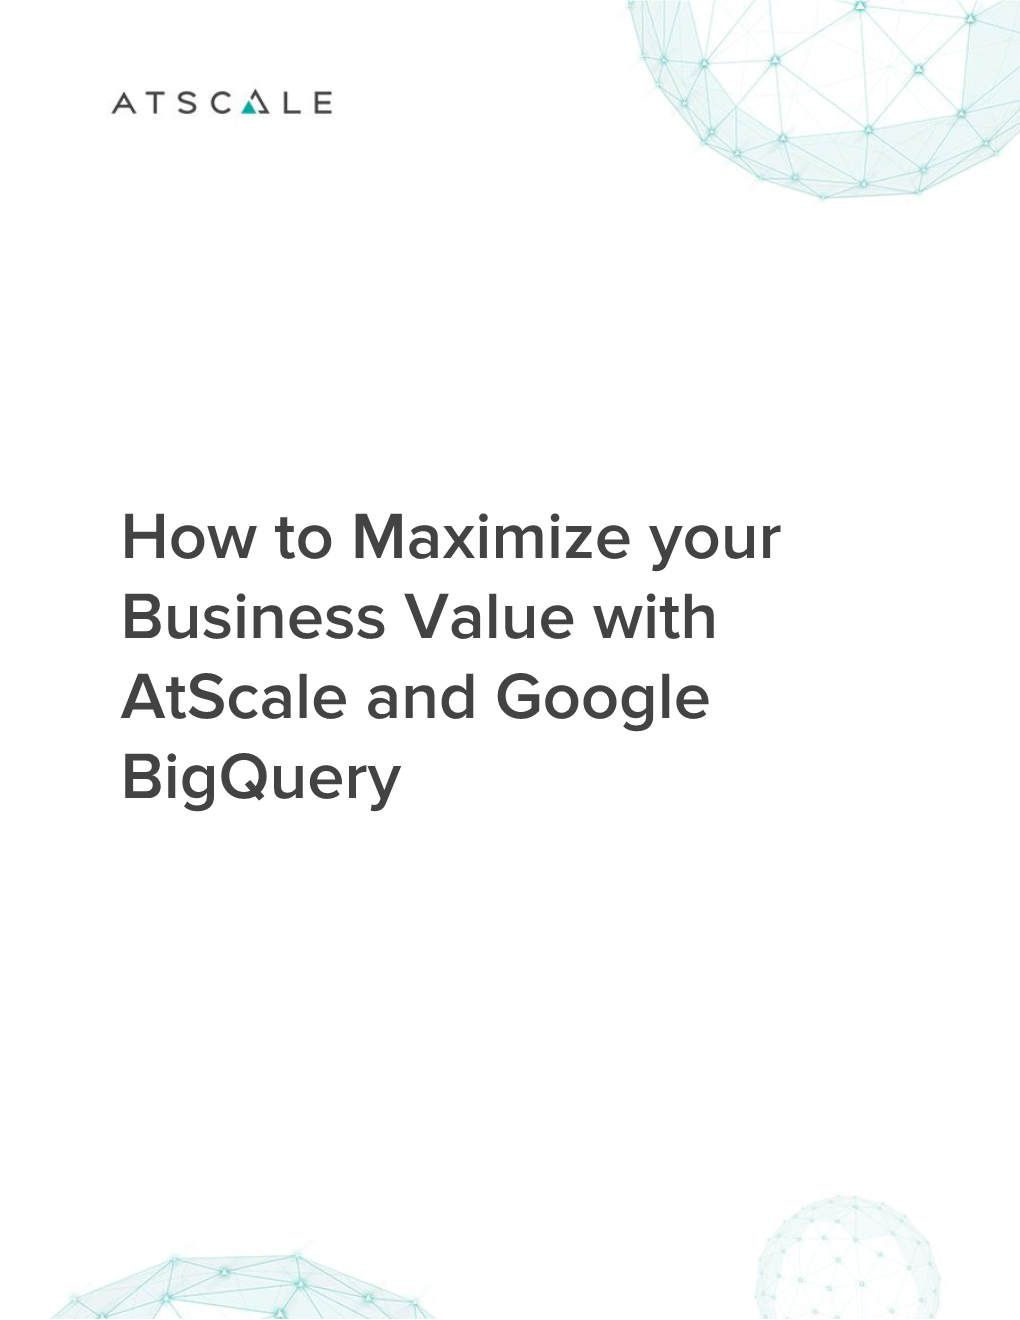 How to Maximize Your Business Value with Atscale and Google Bigquery